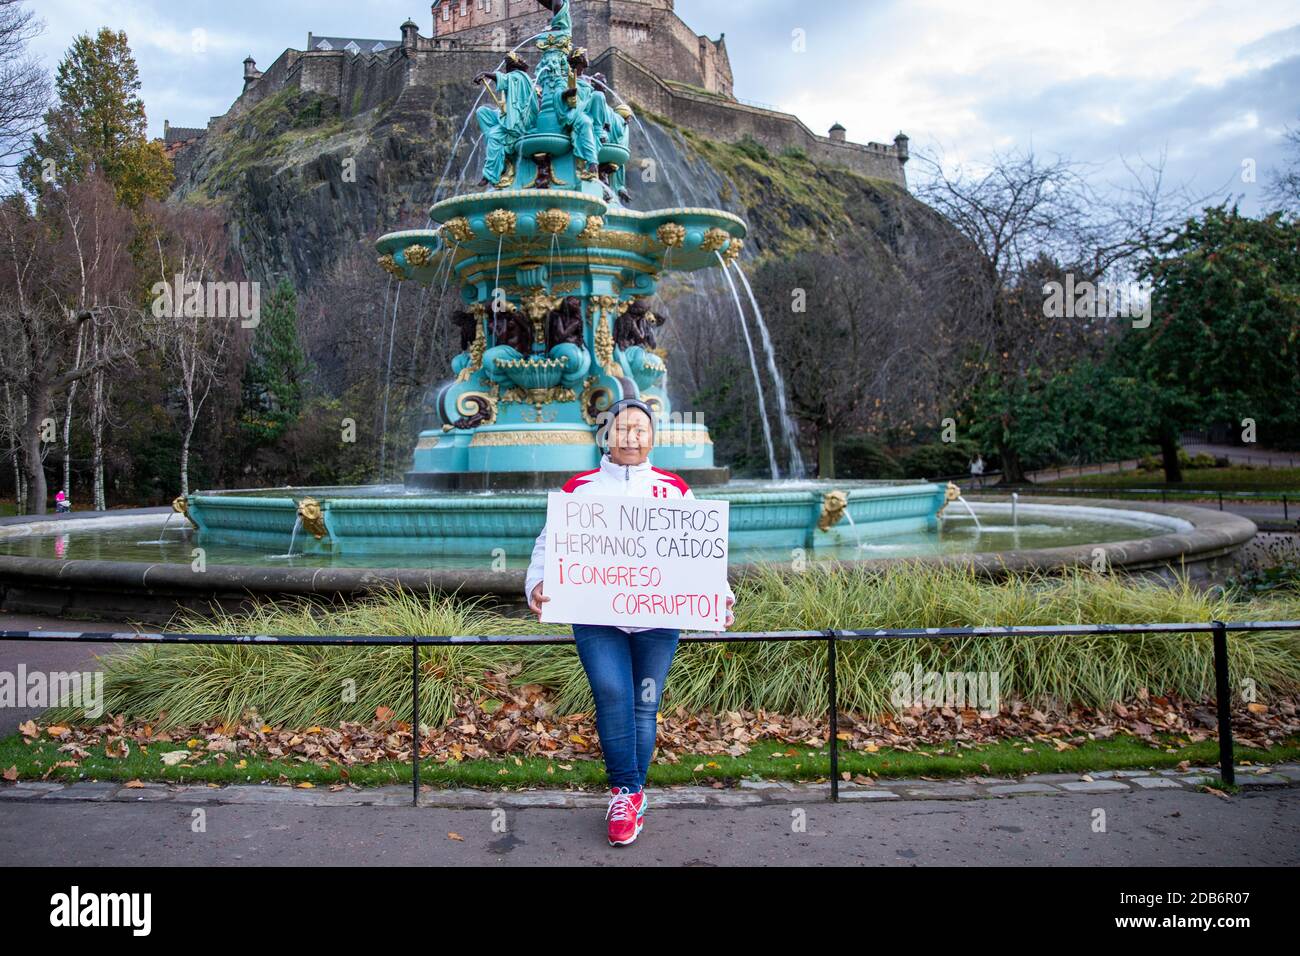 Peruvian residents in Edinburgh staged a small scale protest due to COVID19 restrictions in Central Edinburgh in support of pro democracy and anti corruption protests in Peru. Stock Photo